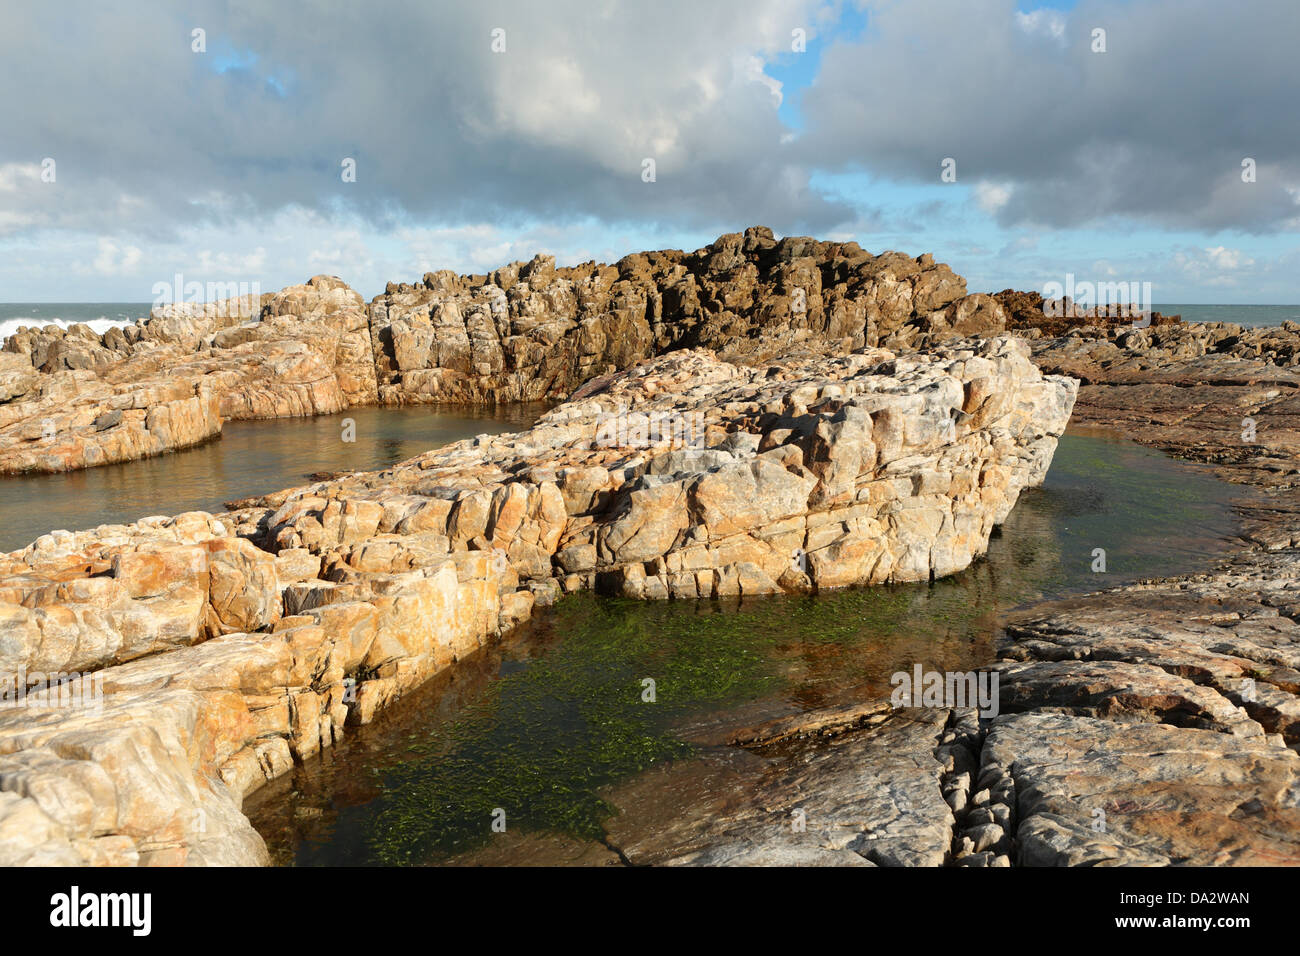 Rock pools on the coast at Danger Point, Gansbaai, Western Cape Province, South Africa Stock Photo